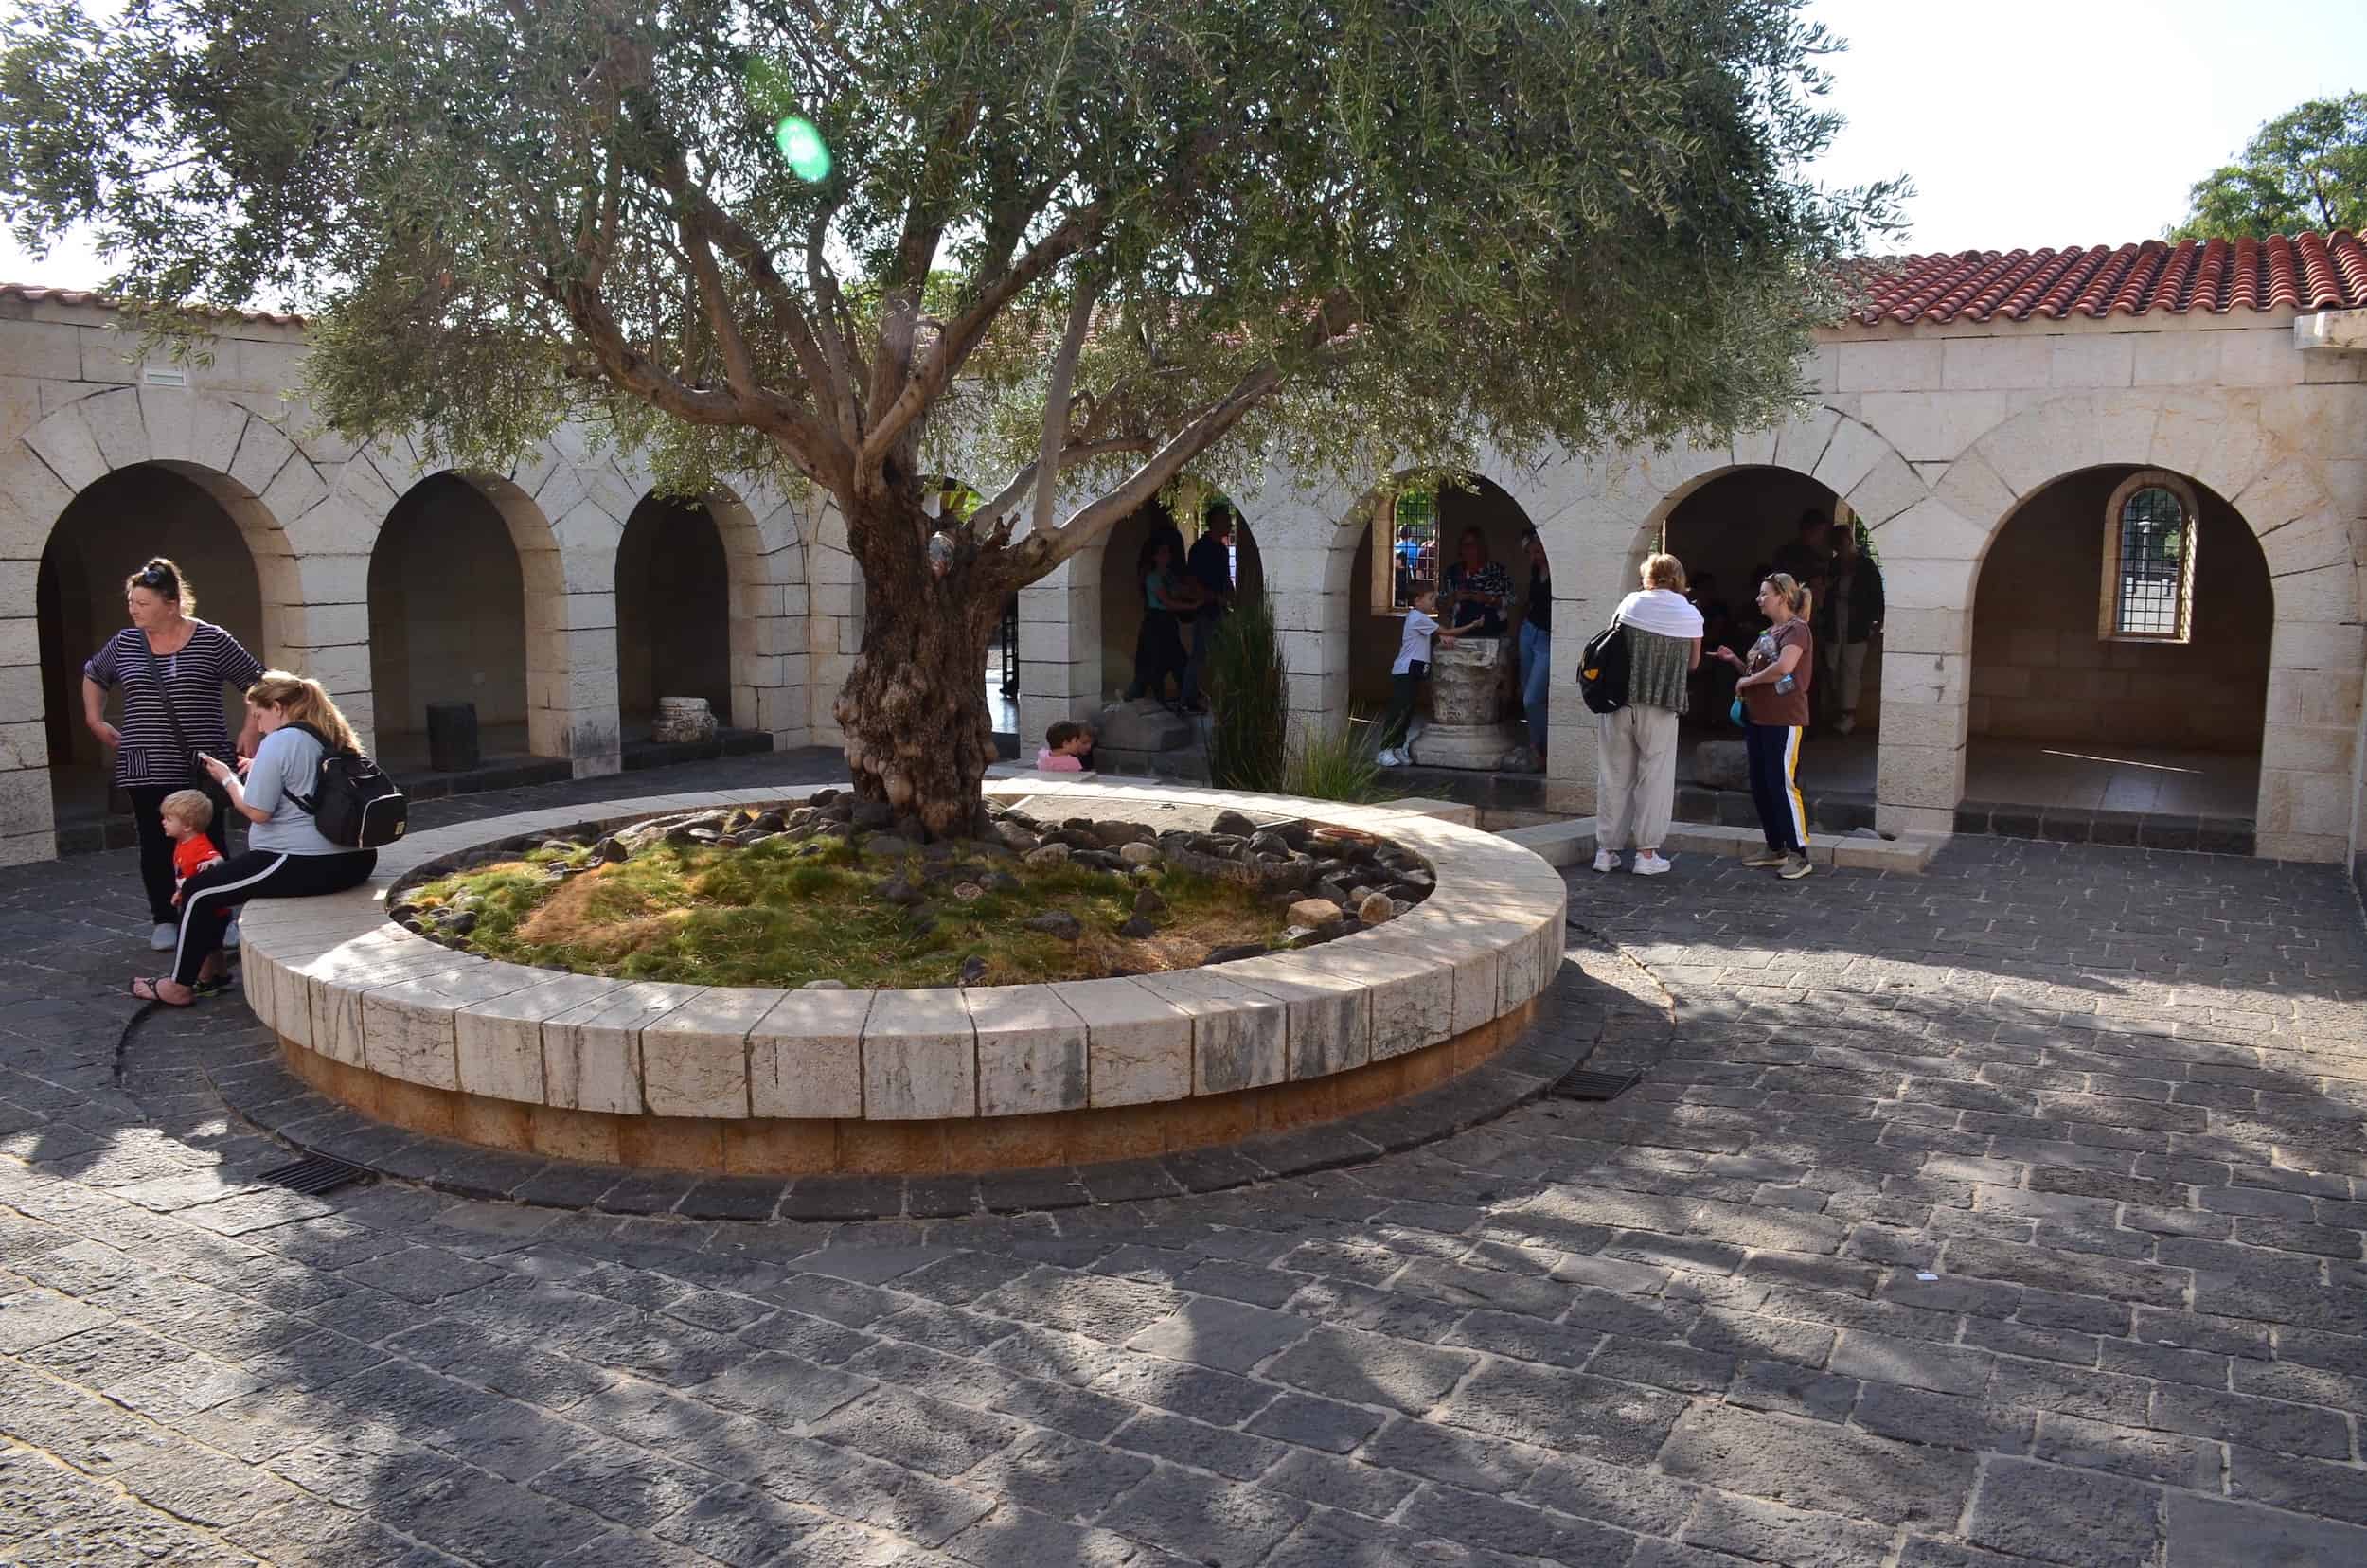 Courtyard at the Church of the Multiplication in Tabgha, Israel